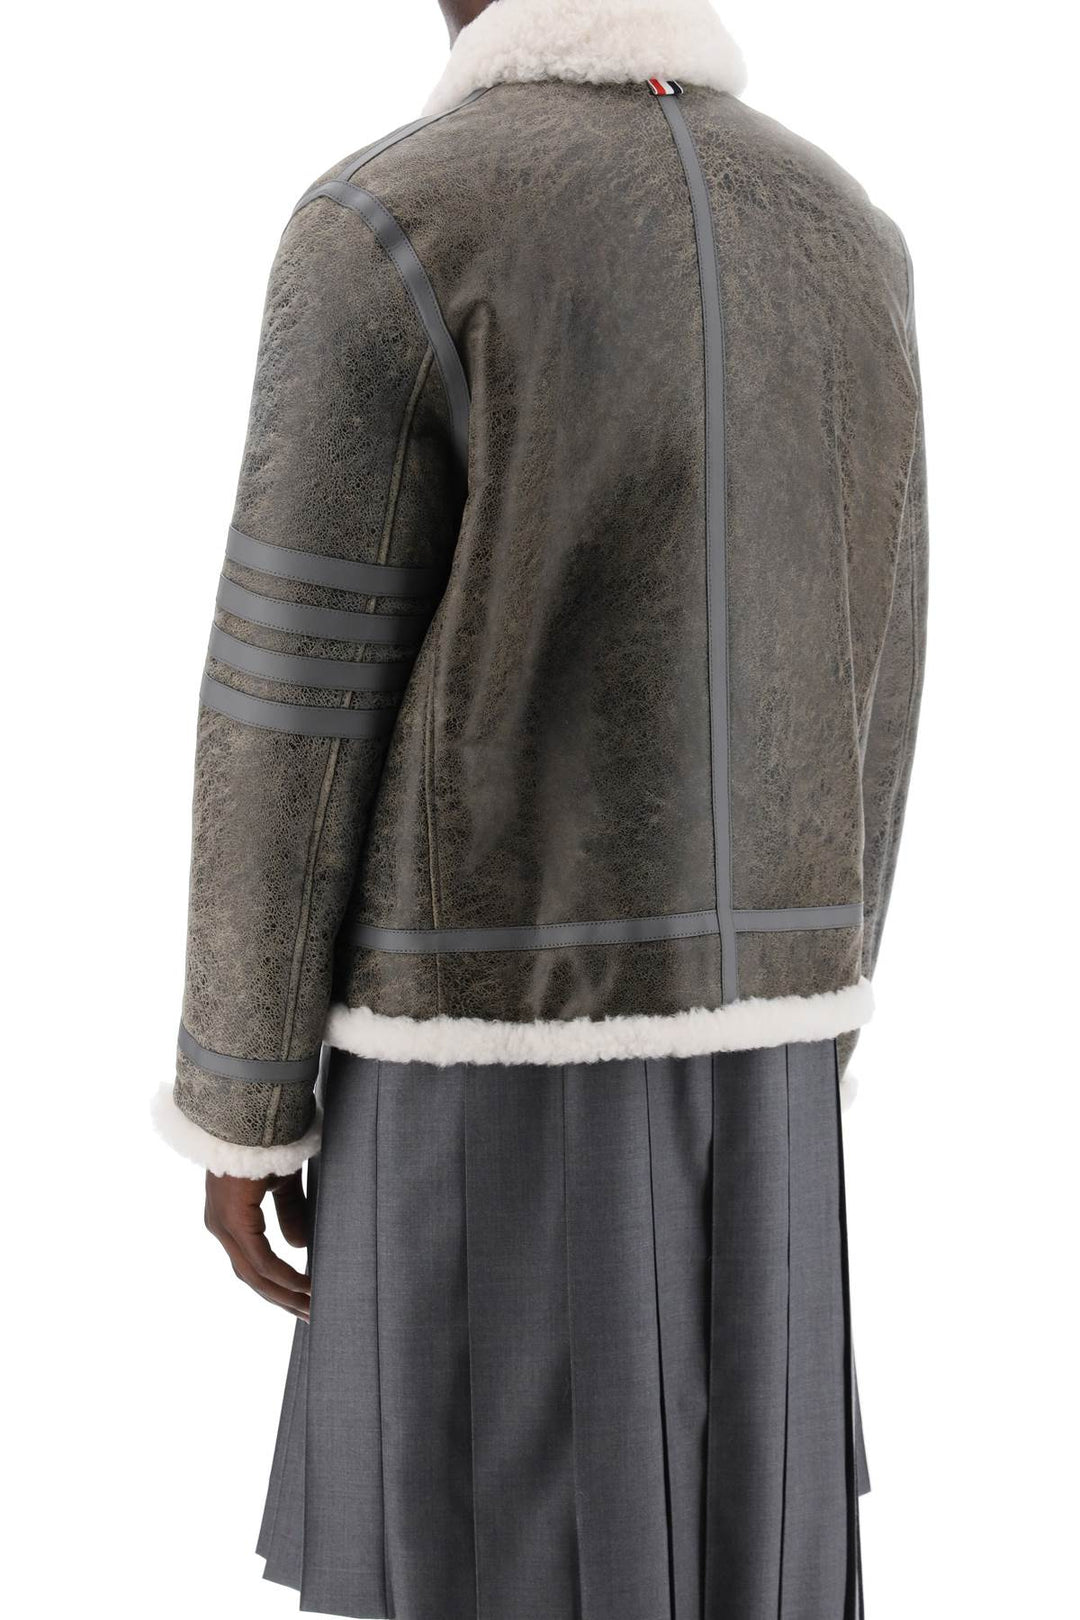 Thom Browne Shearling Cropped Montgomery Jacket   Grey